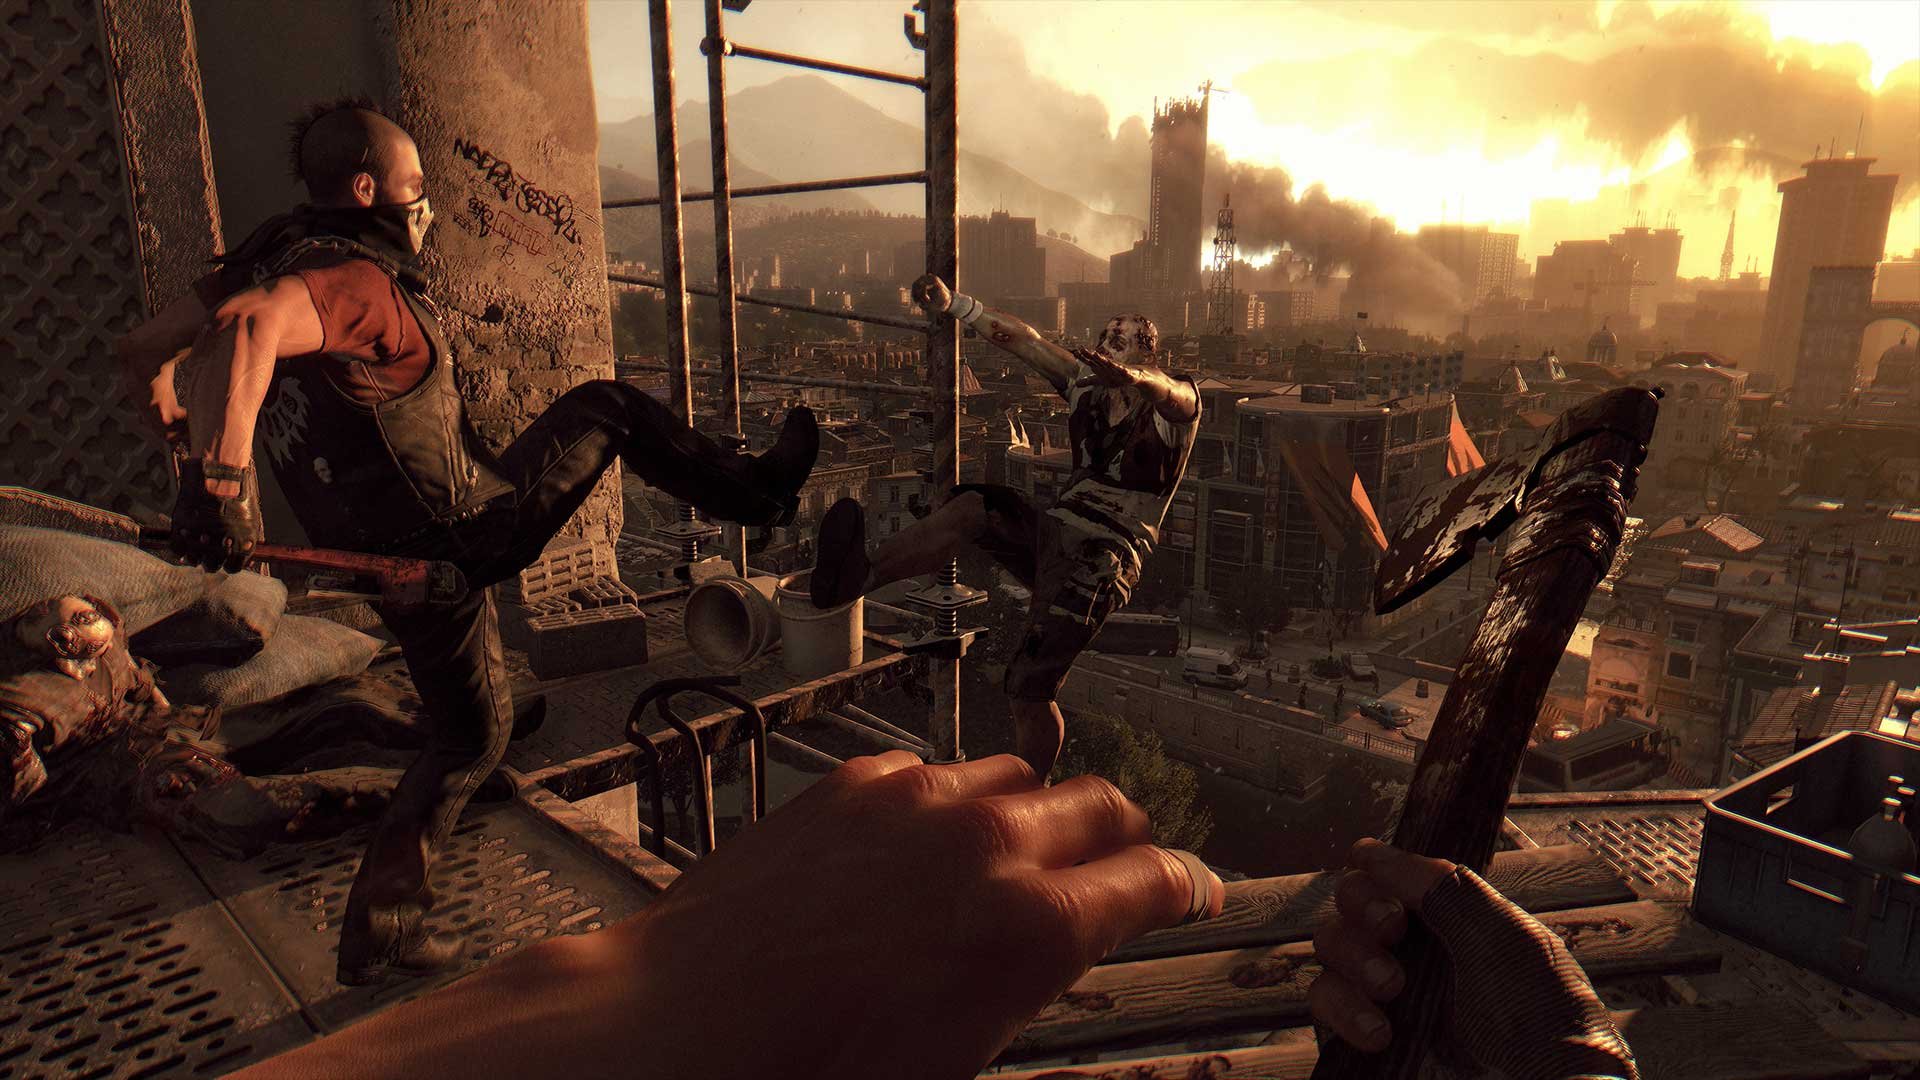 You Might Be Getting Dying Light: The Following Enhanced Edition